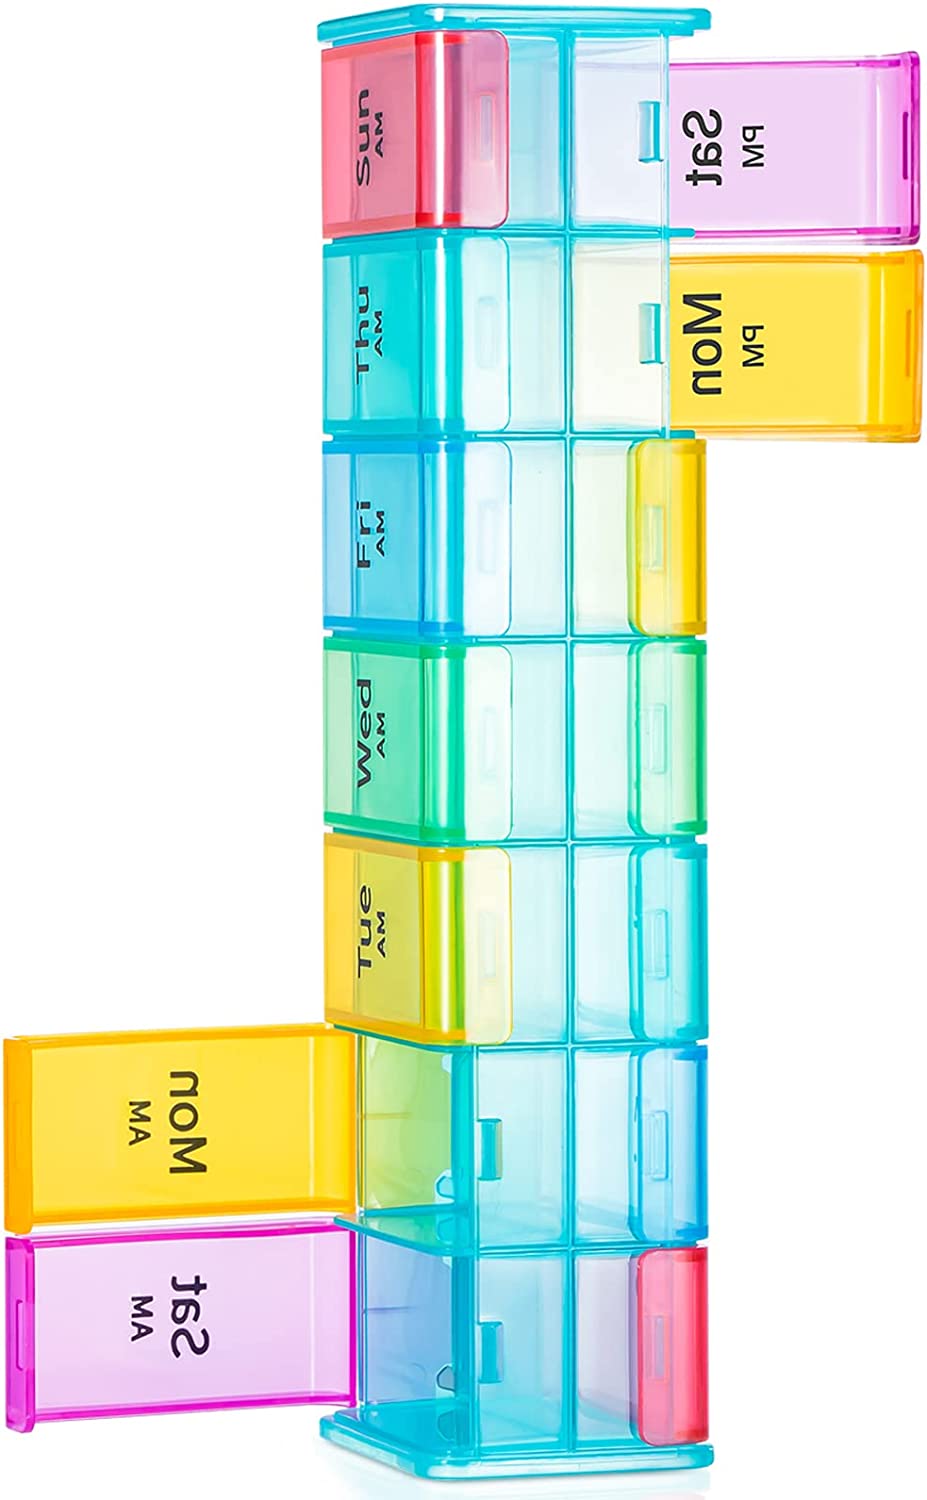 Extra Large Pill Organizer 2 Rows 14 Grids Weekly Pill Box